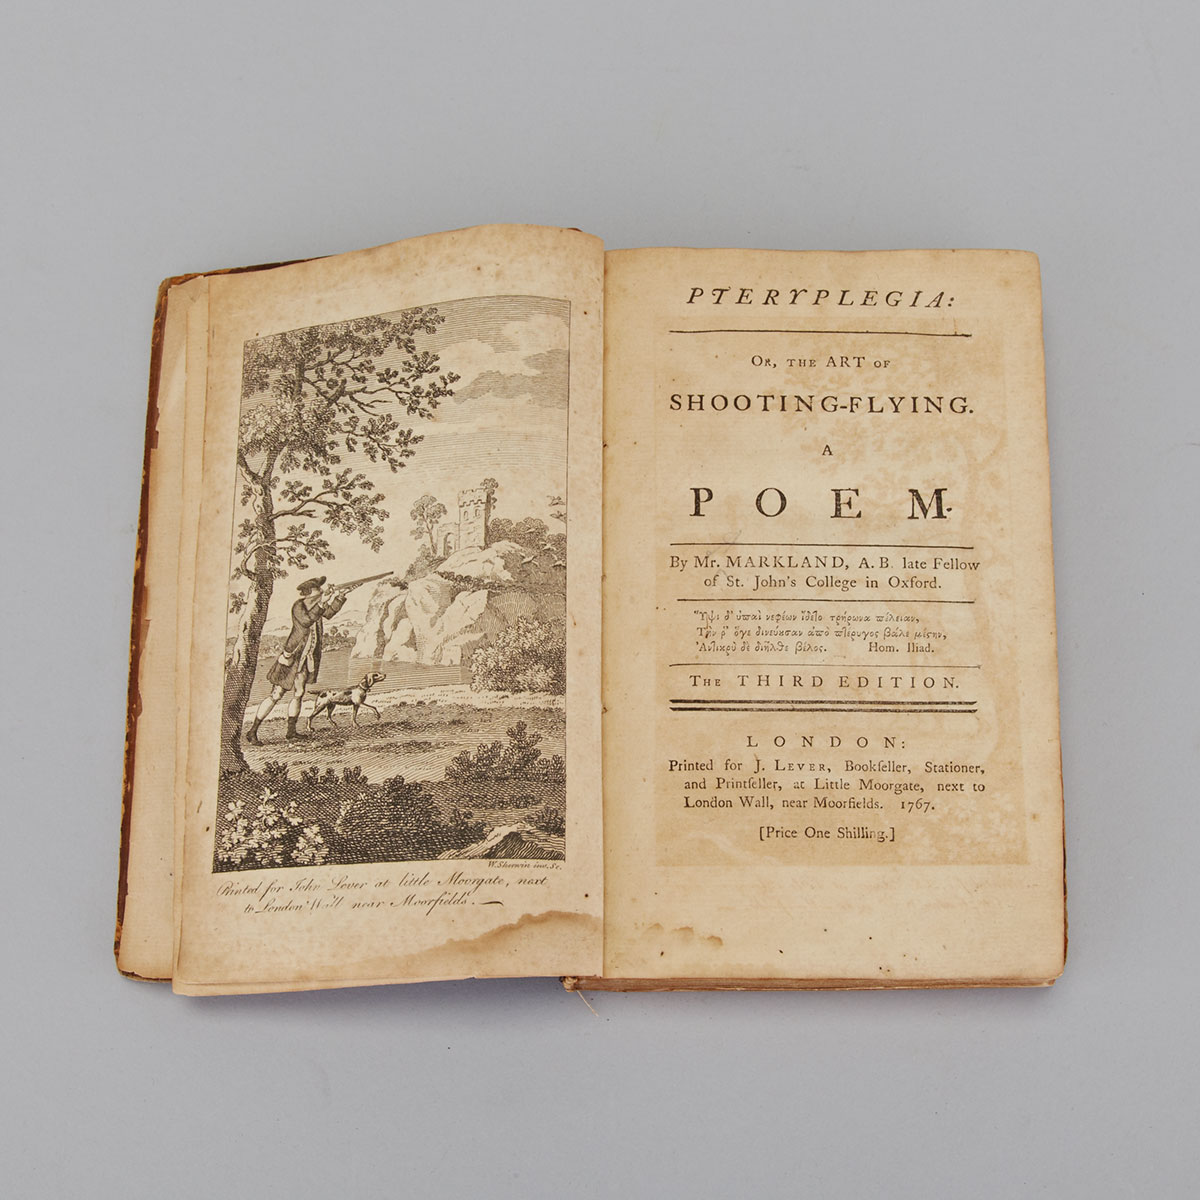 Sammelband Volume of Hunting and Equestrian Interest, 18th century